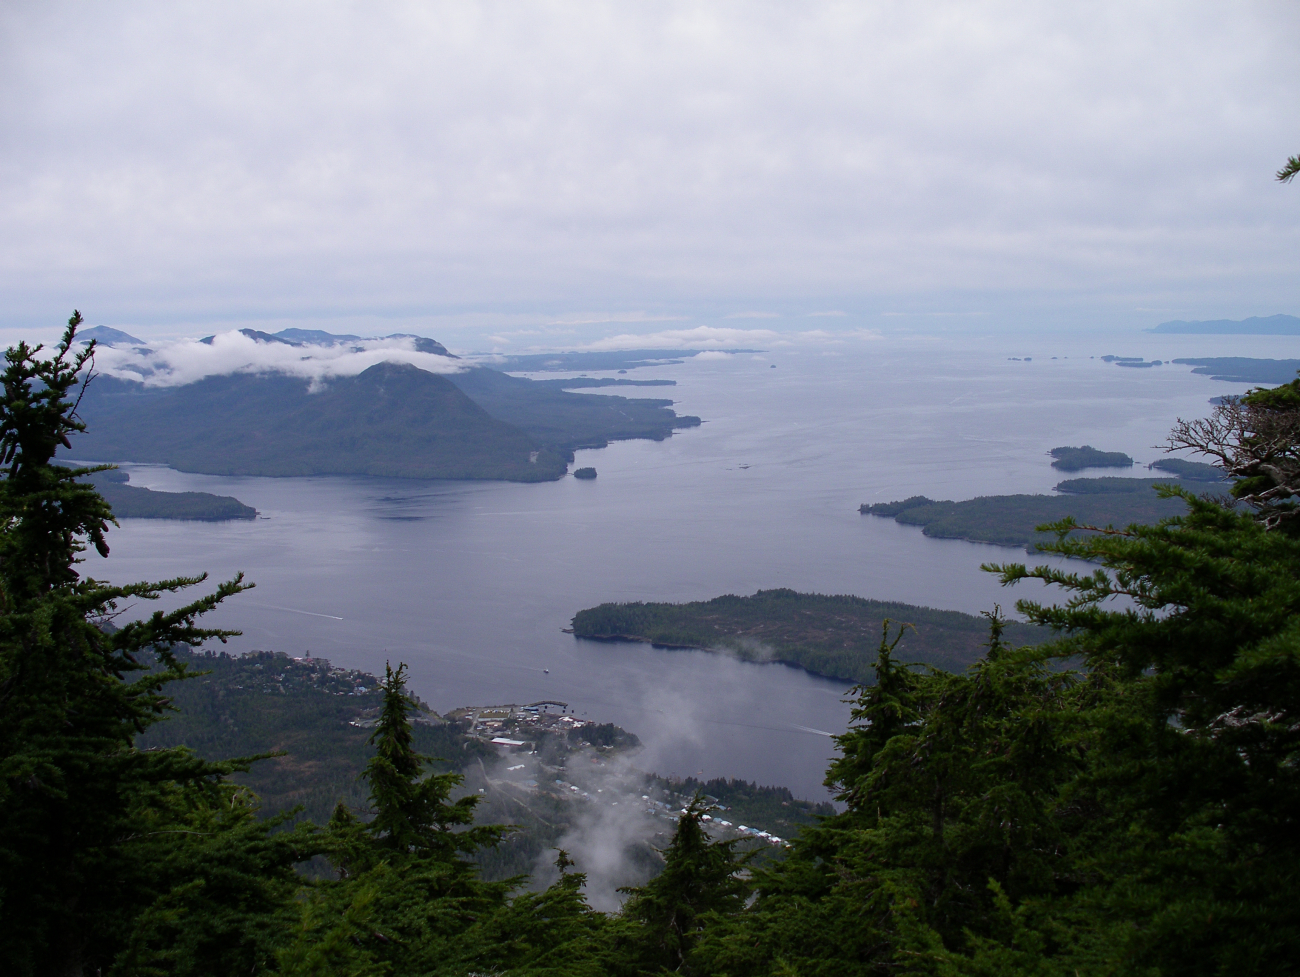 A view of Ketchikan from above